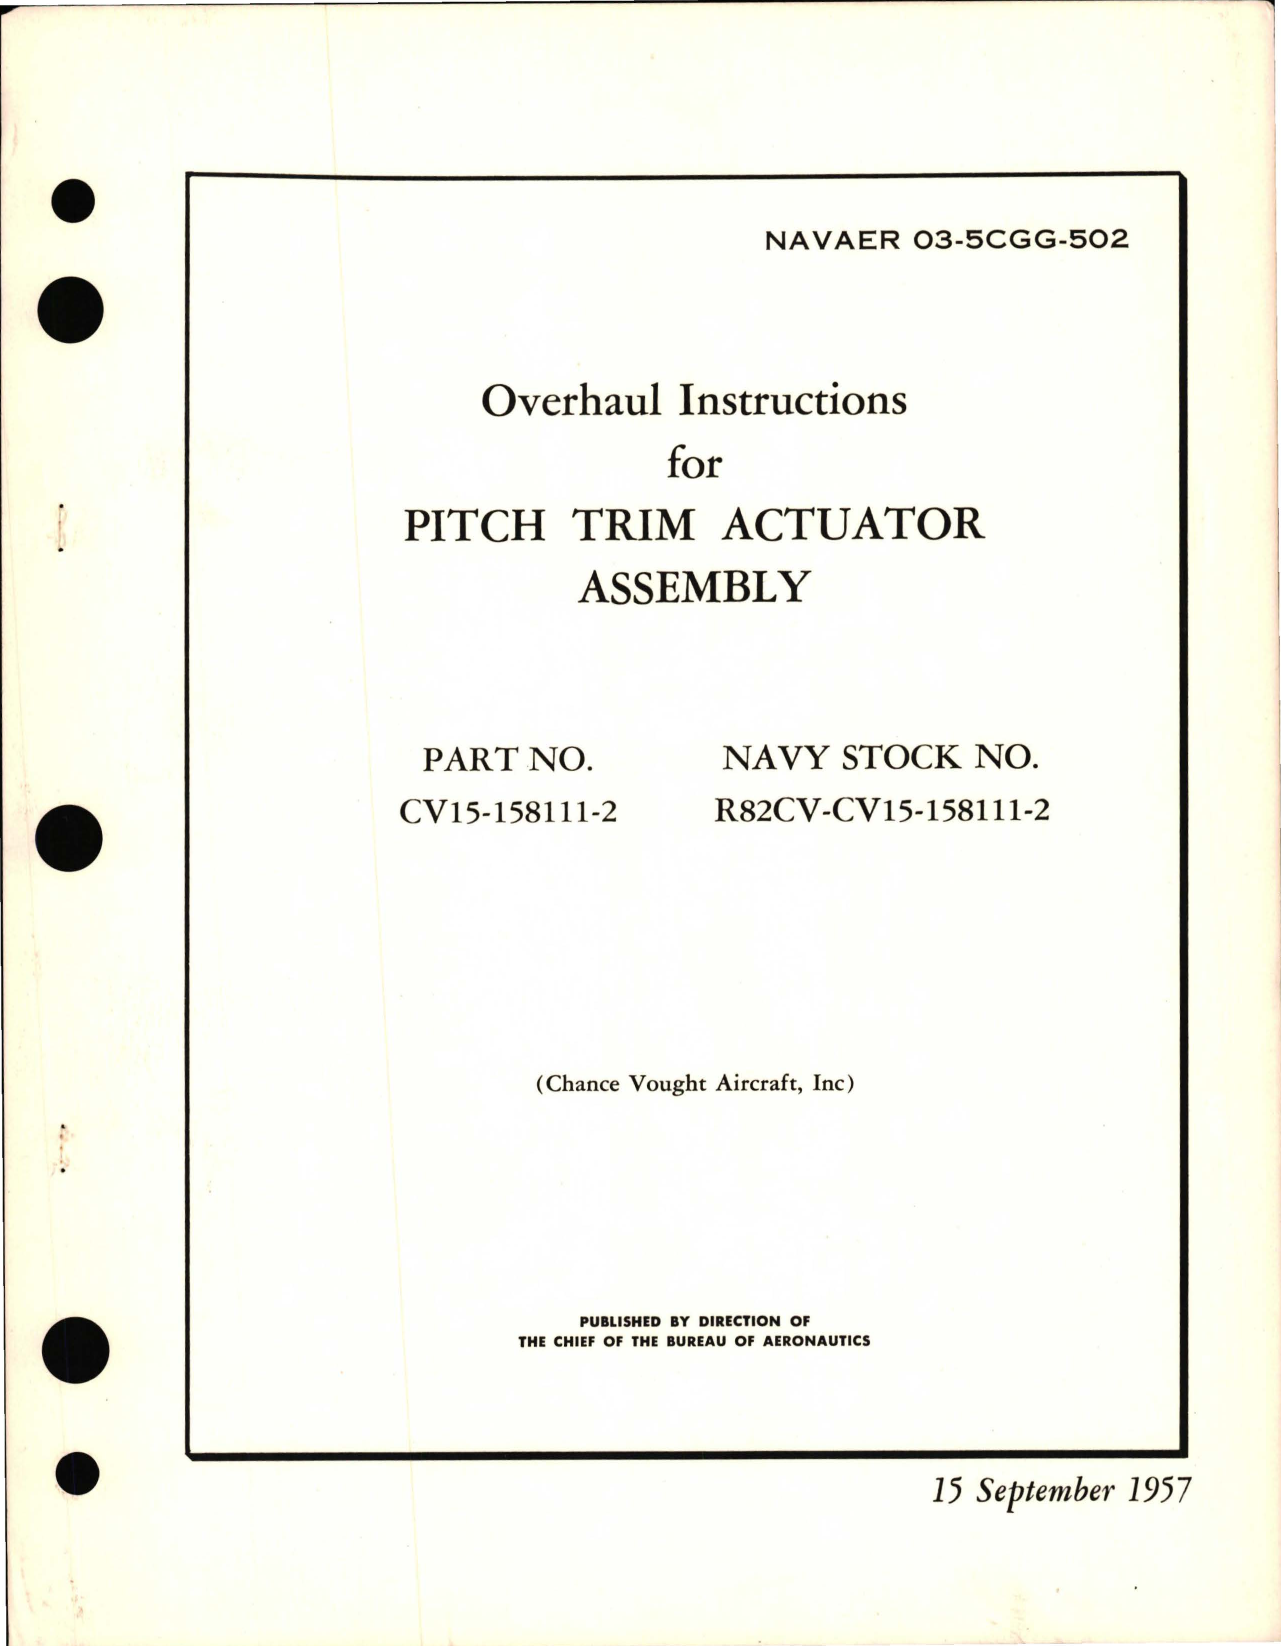 Sample page 1 from AirCorps Library document: Overhaul Instructions for Pitch Trim Actuator Assembly - Part CV15-158111-2 